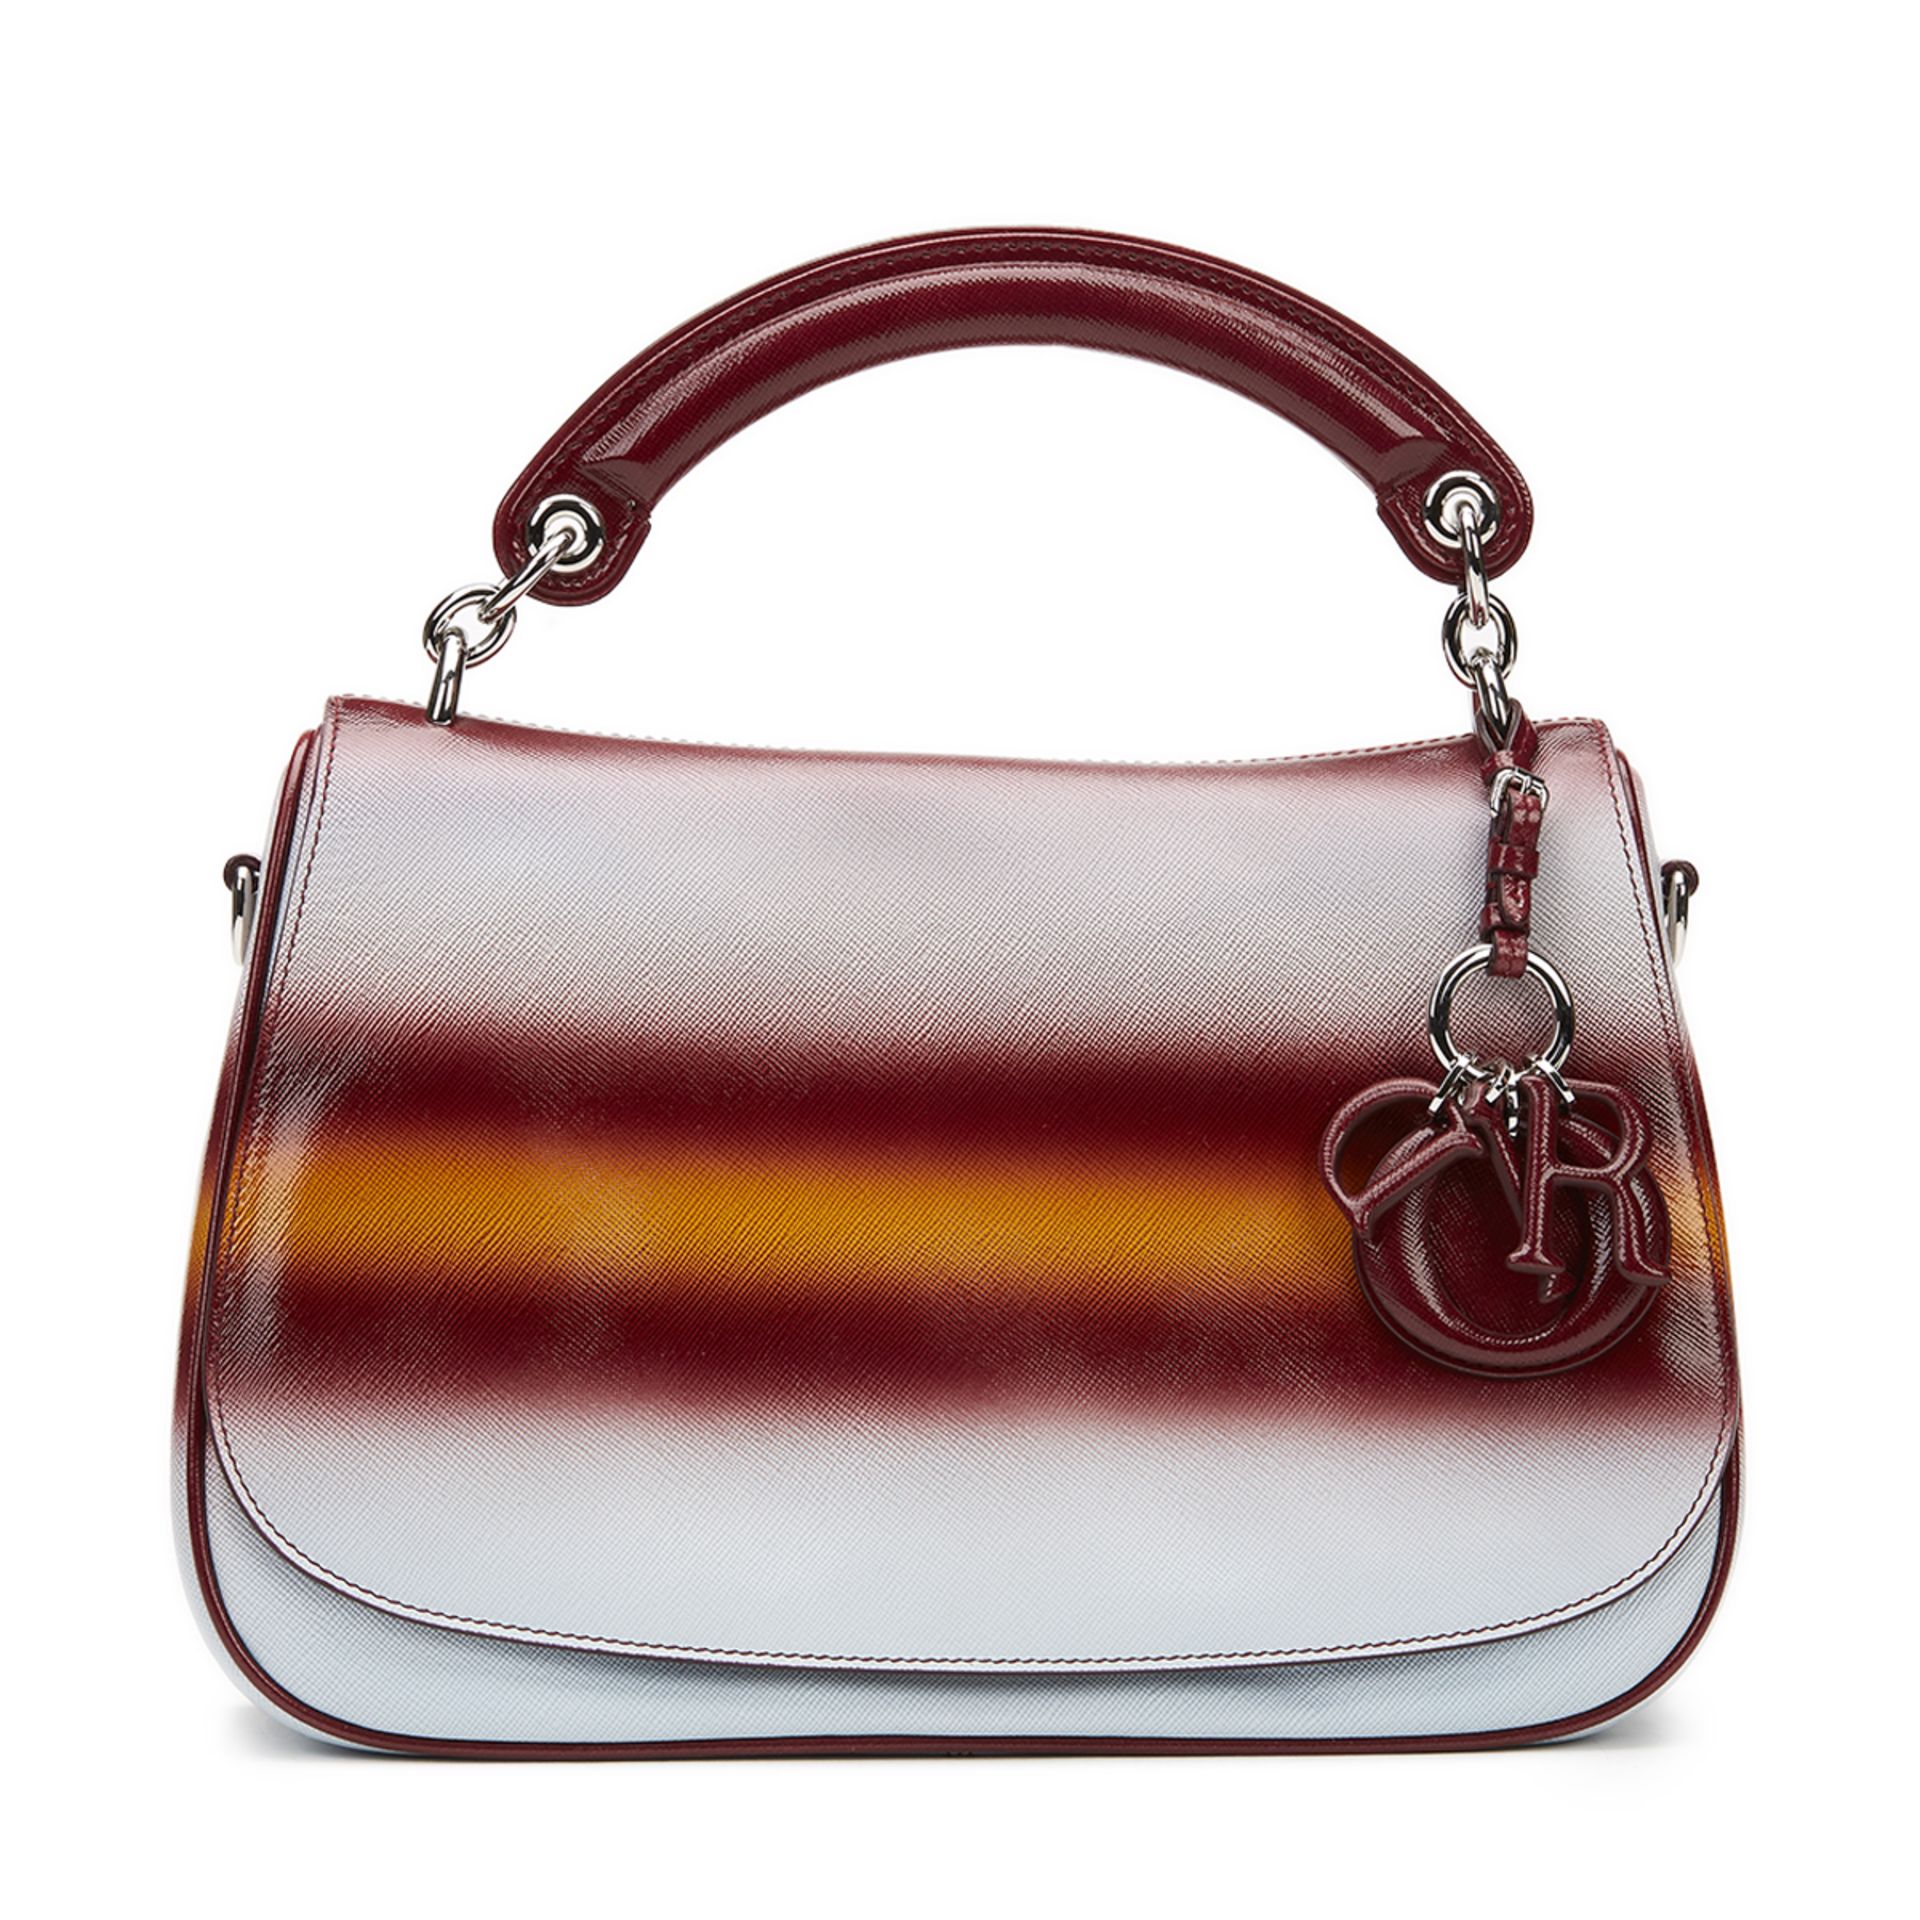 Christian Dior Maroon, Mustard & Blue Gradient Patent Leather Dune Bag - Image 5 of 11